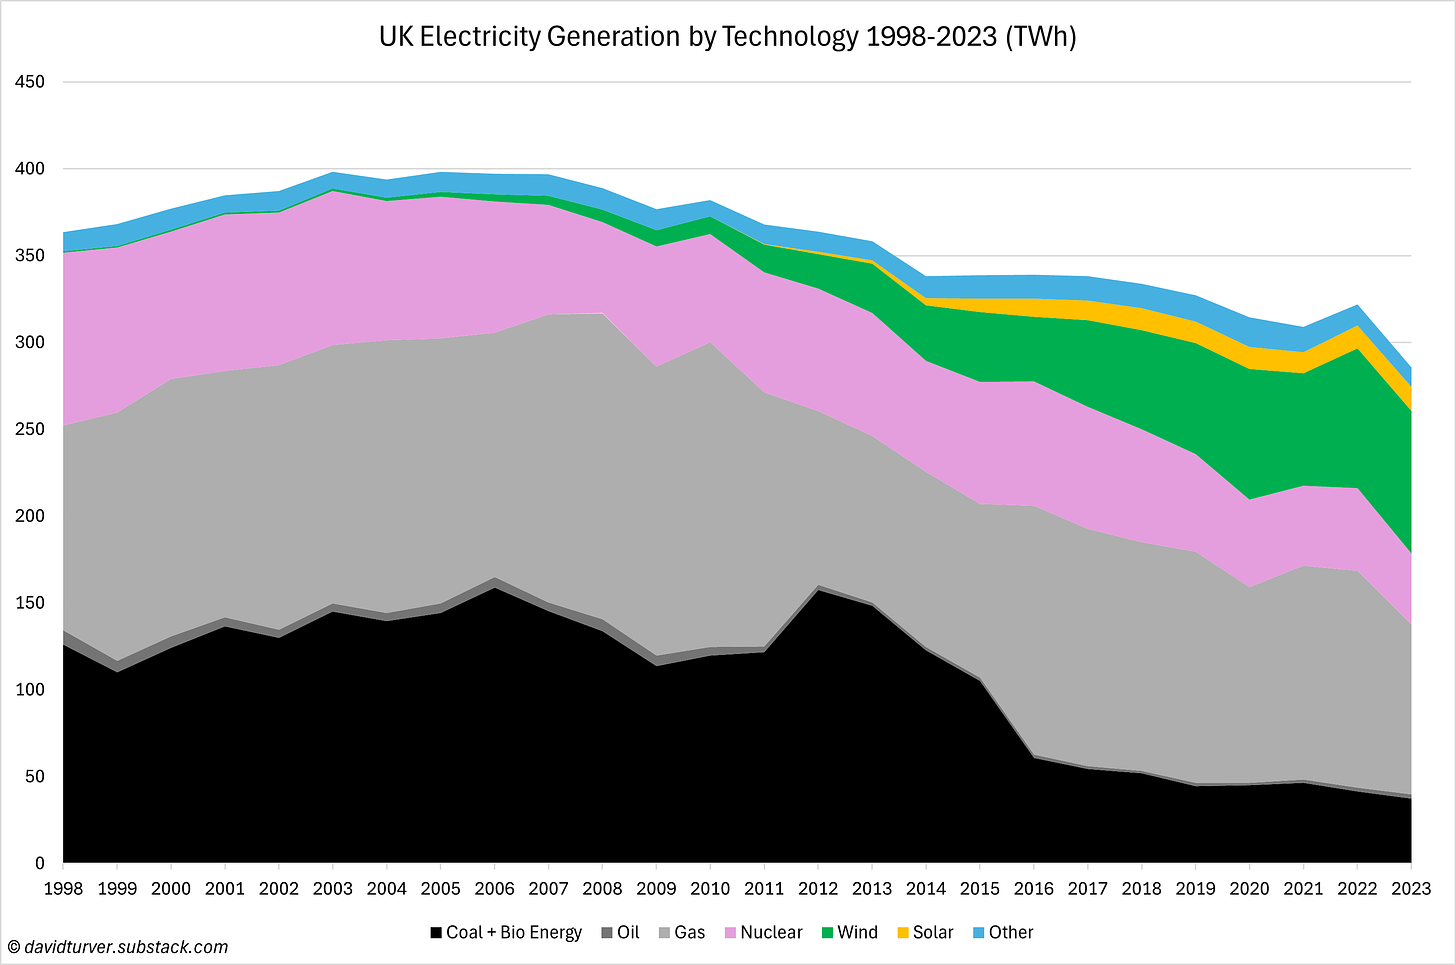 Figure 9 - UK Electricity Generation by Technology 1998-2023 (TWh)